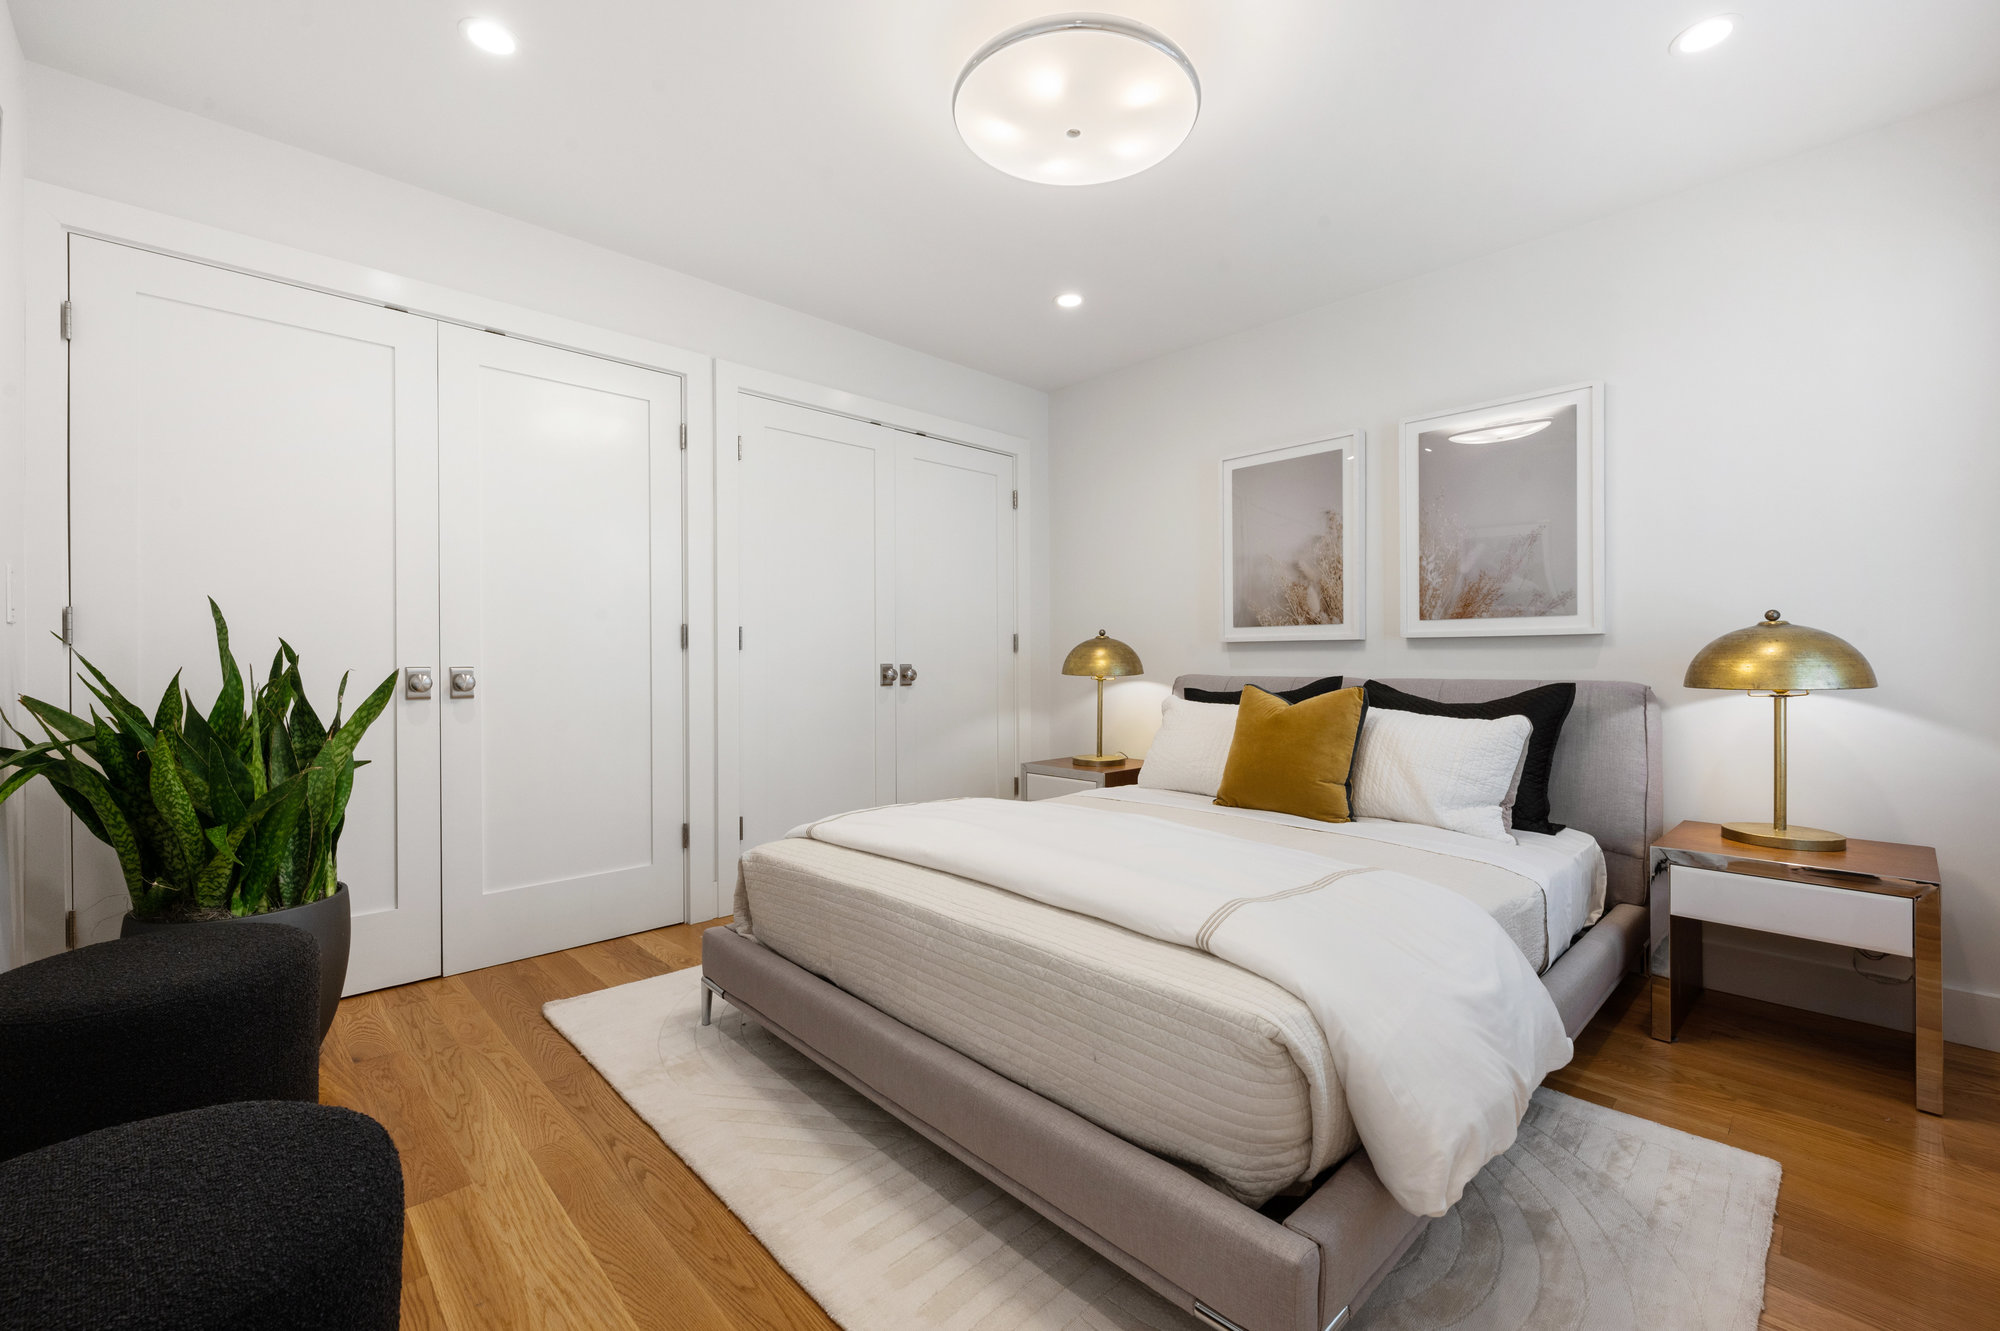 Property Photo: Bedroom four, showing large double closets and wood floors 